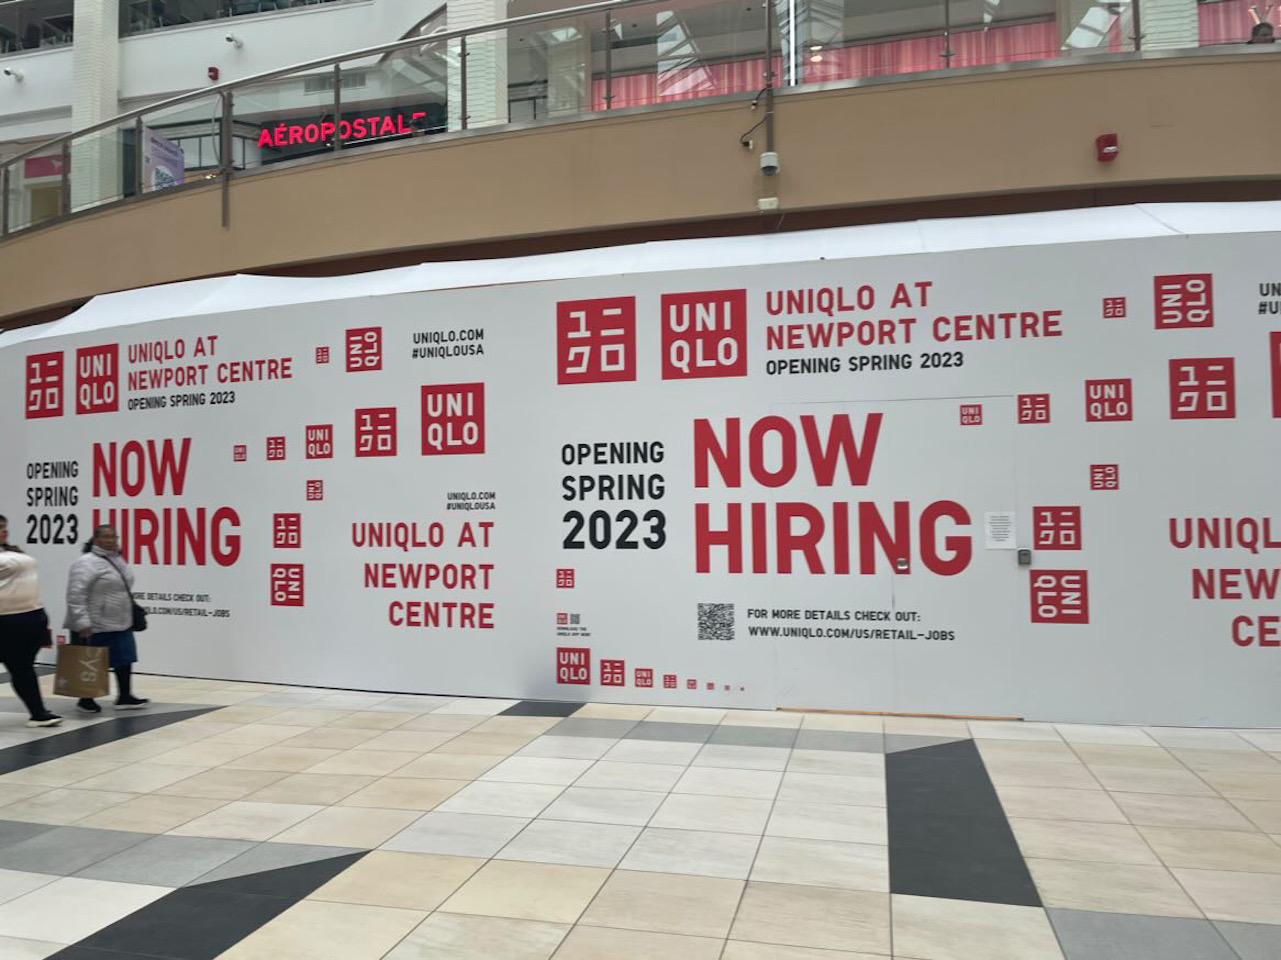 Uniqlo is coming to the Newport mall - Apple should come as well :  r/jerseycity